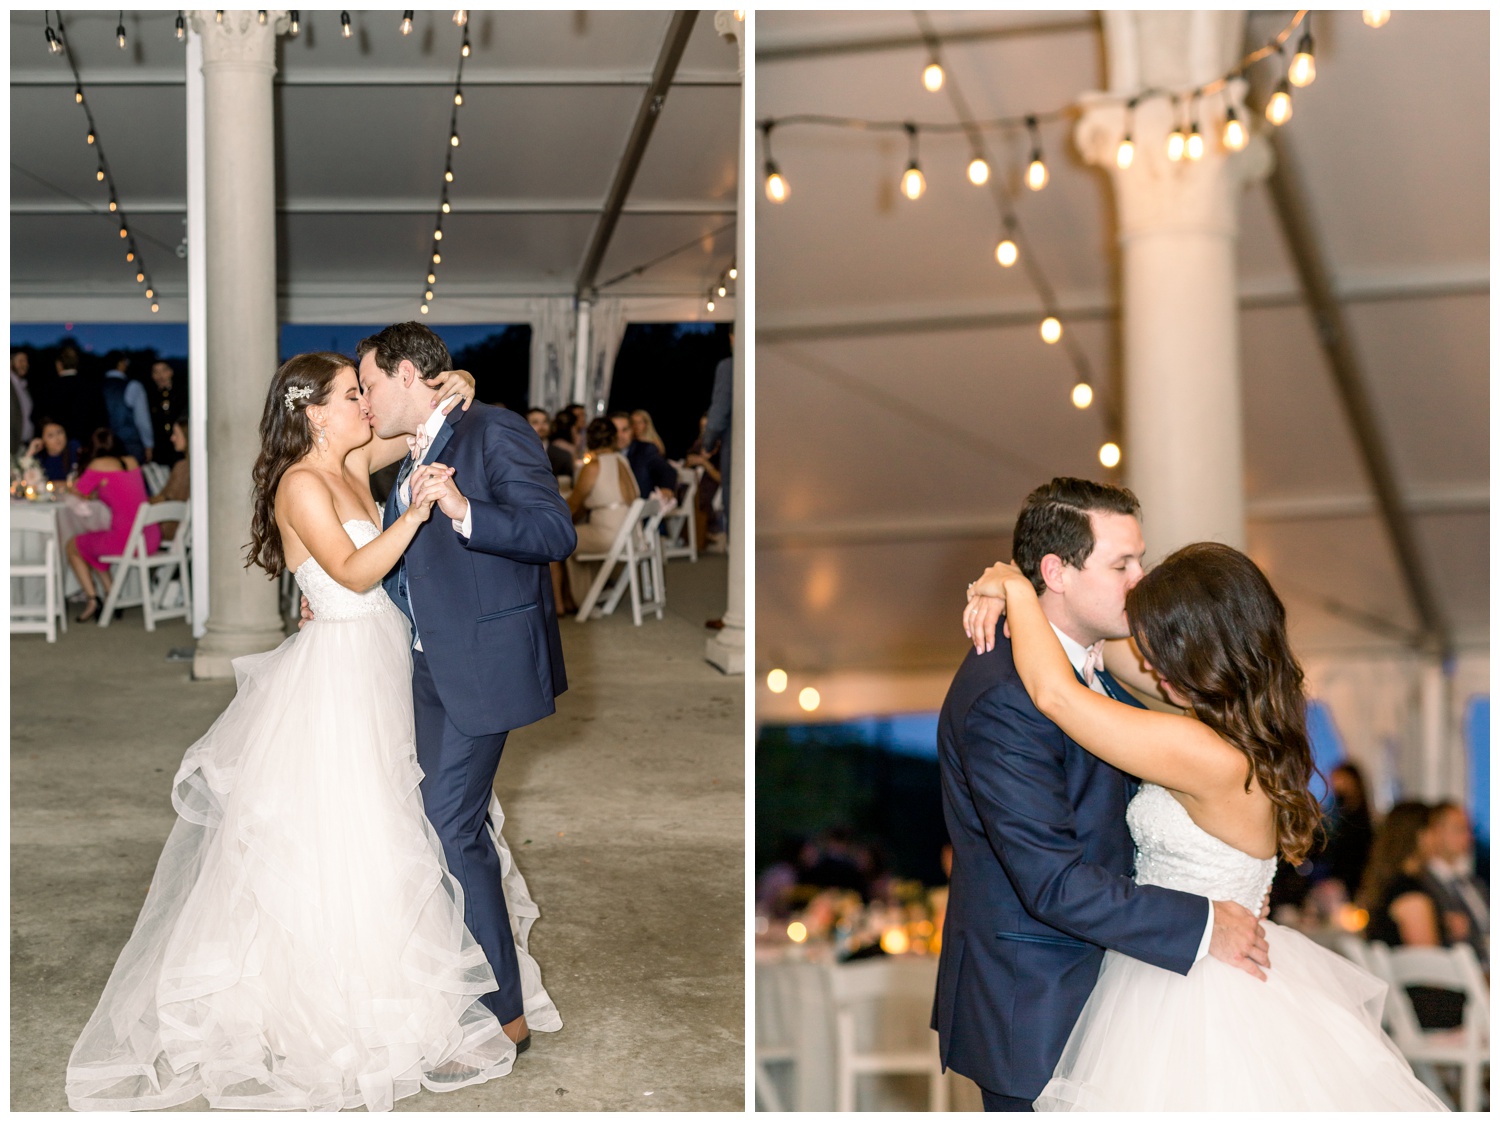 Bride and Groom First Dance at Ault Park - Premier Park Events